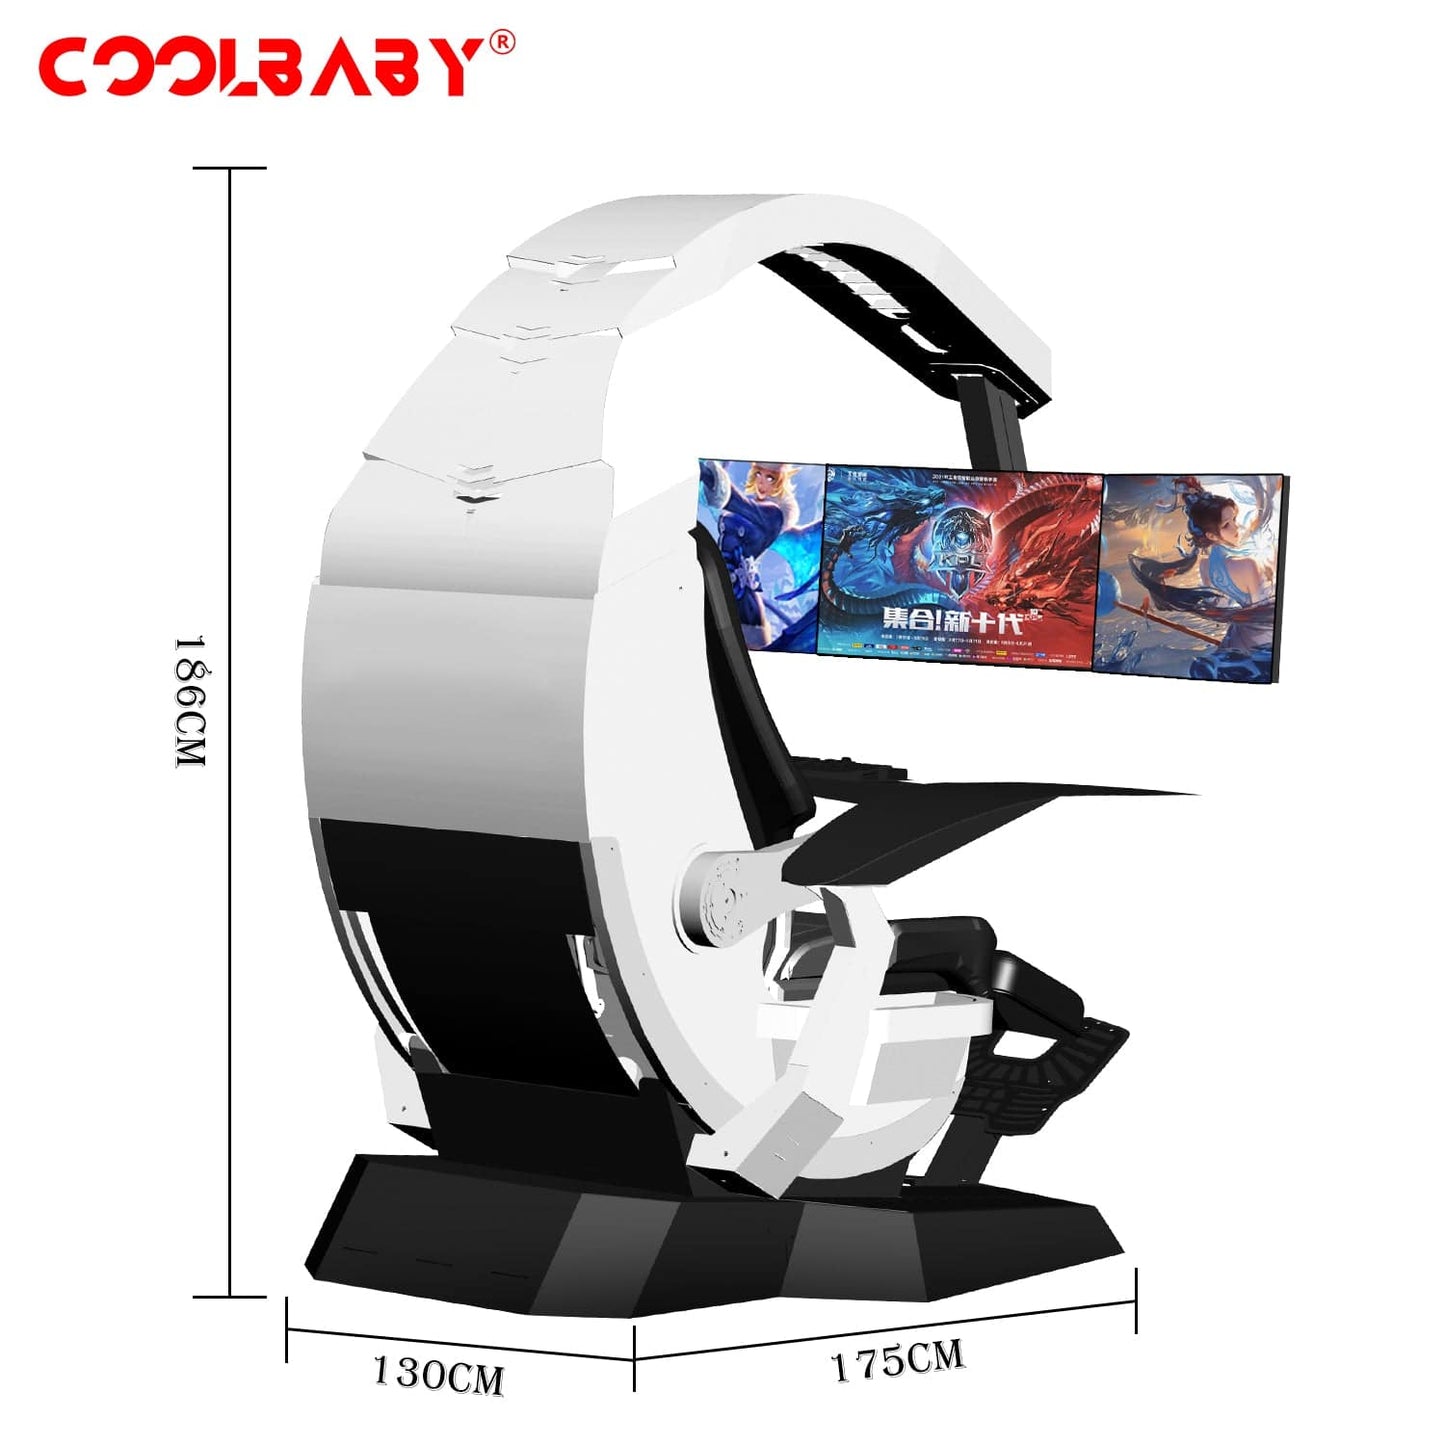 COOLBABY All-in-One Ergonomic Gaming Office Chair with High-Quality Desk - COOLBABY